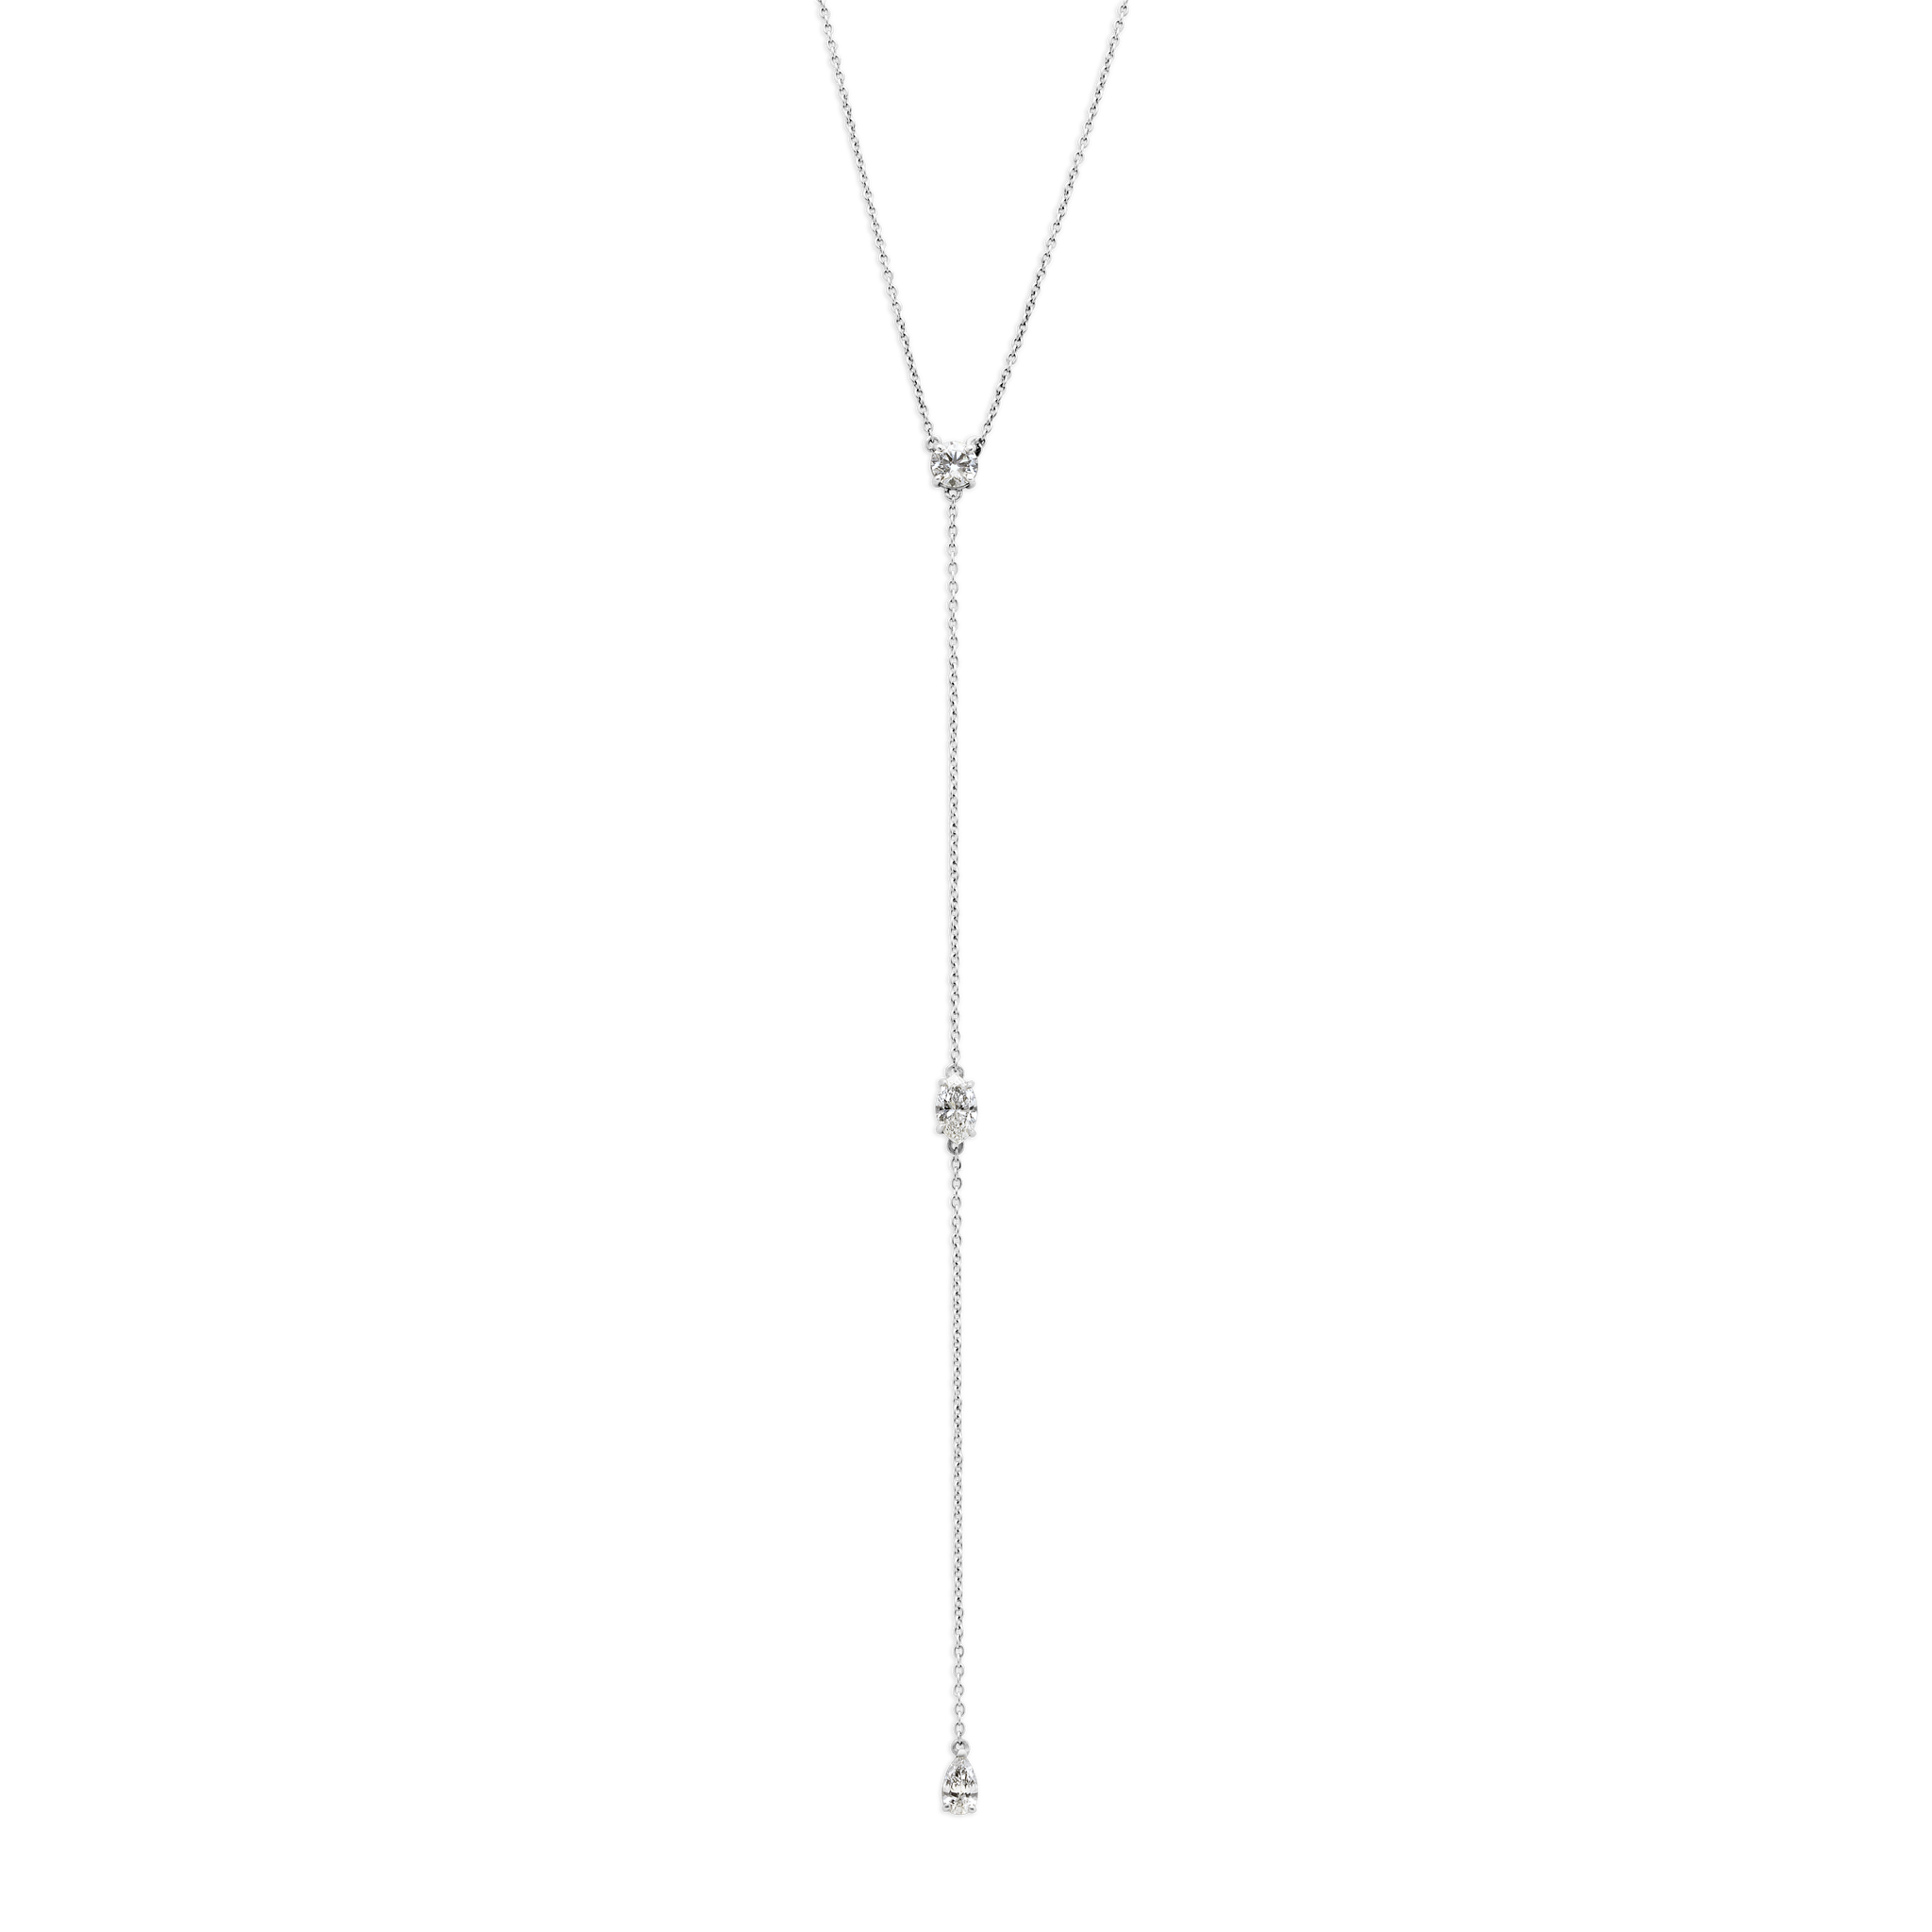 Three 0.25ct diamonds are strung along a 18k gold chain. Diamond shapes from top to bottom are: Round, Marquise, Pear. The collar of the necklace measures 16 inches (40cm); the length of the drop is 4 inches (10cm). To customize, please write to our Atelier. 18k White Gold shown here. Pair with the matching earrings in the Lariat collection.